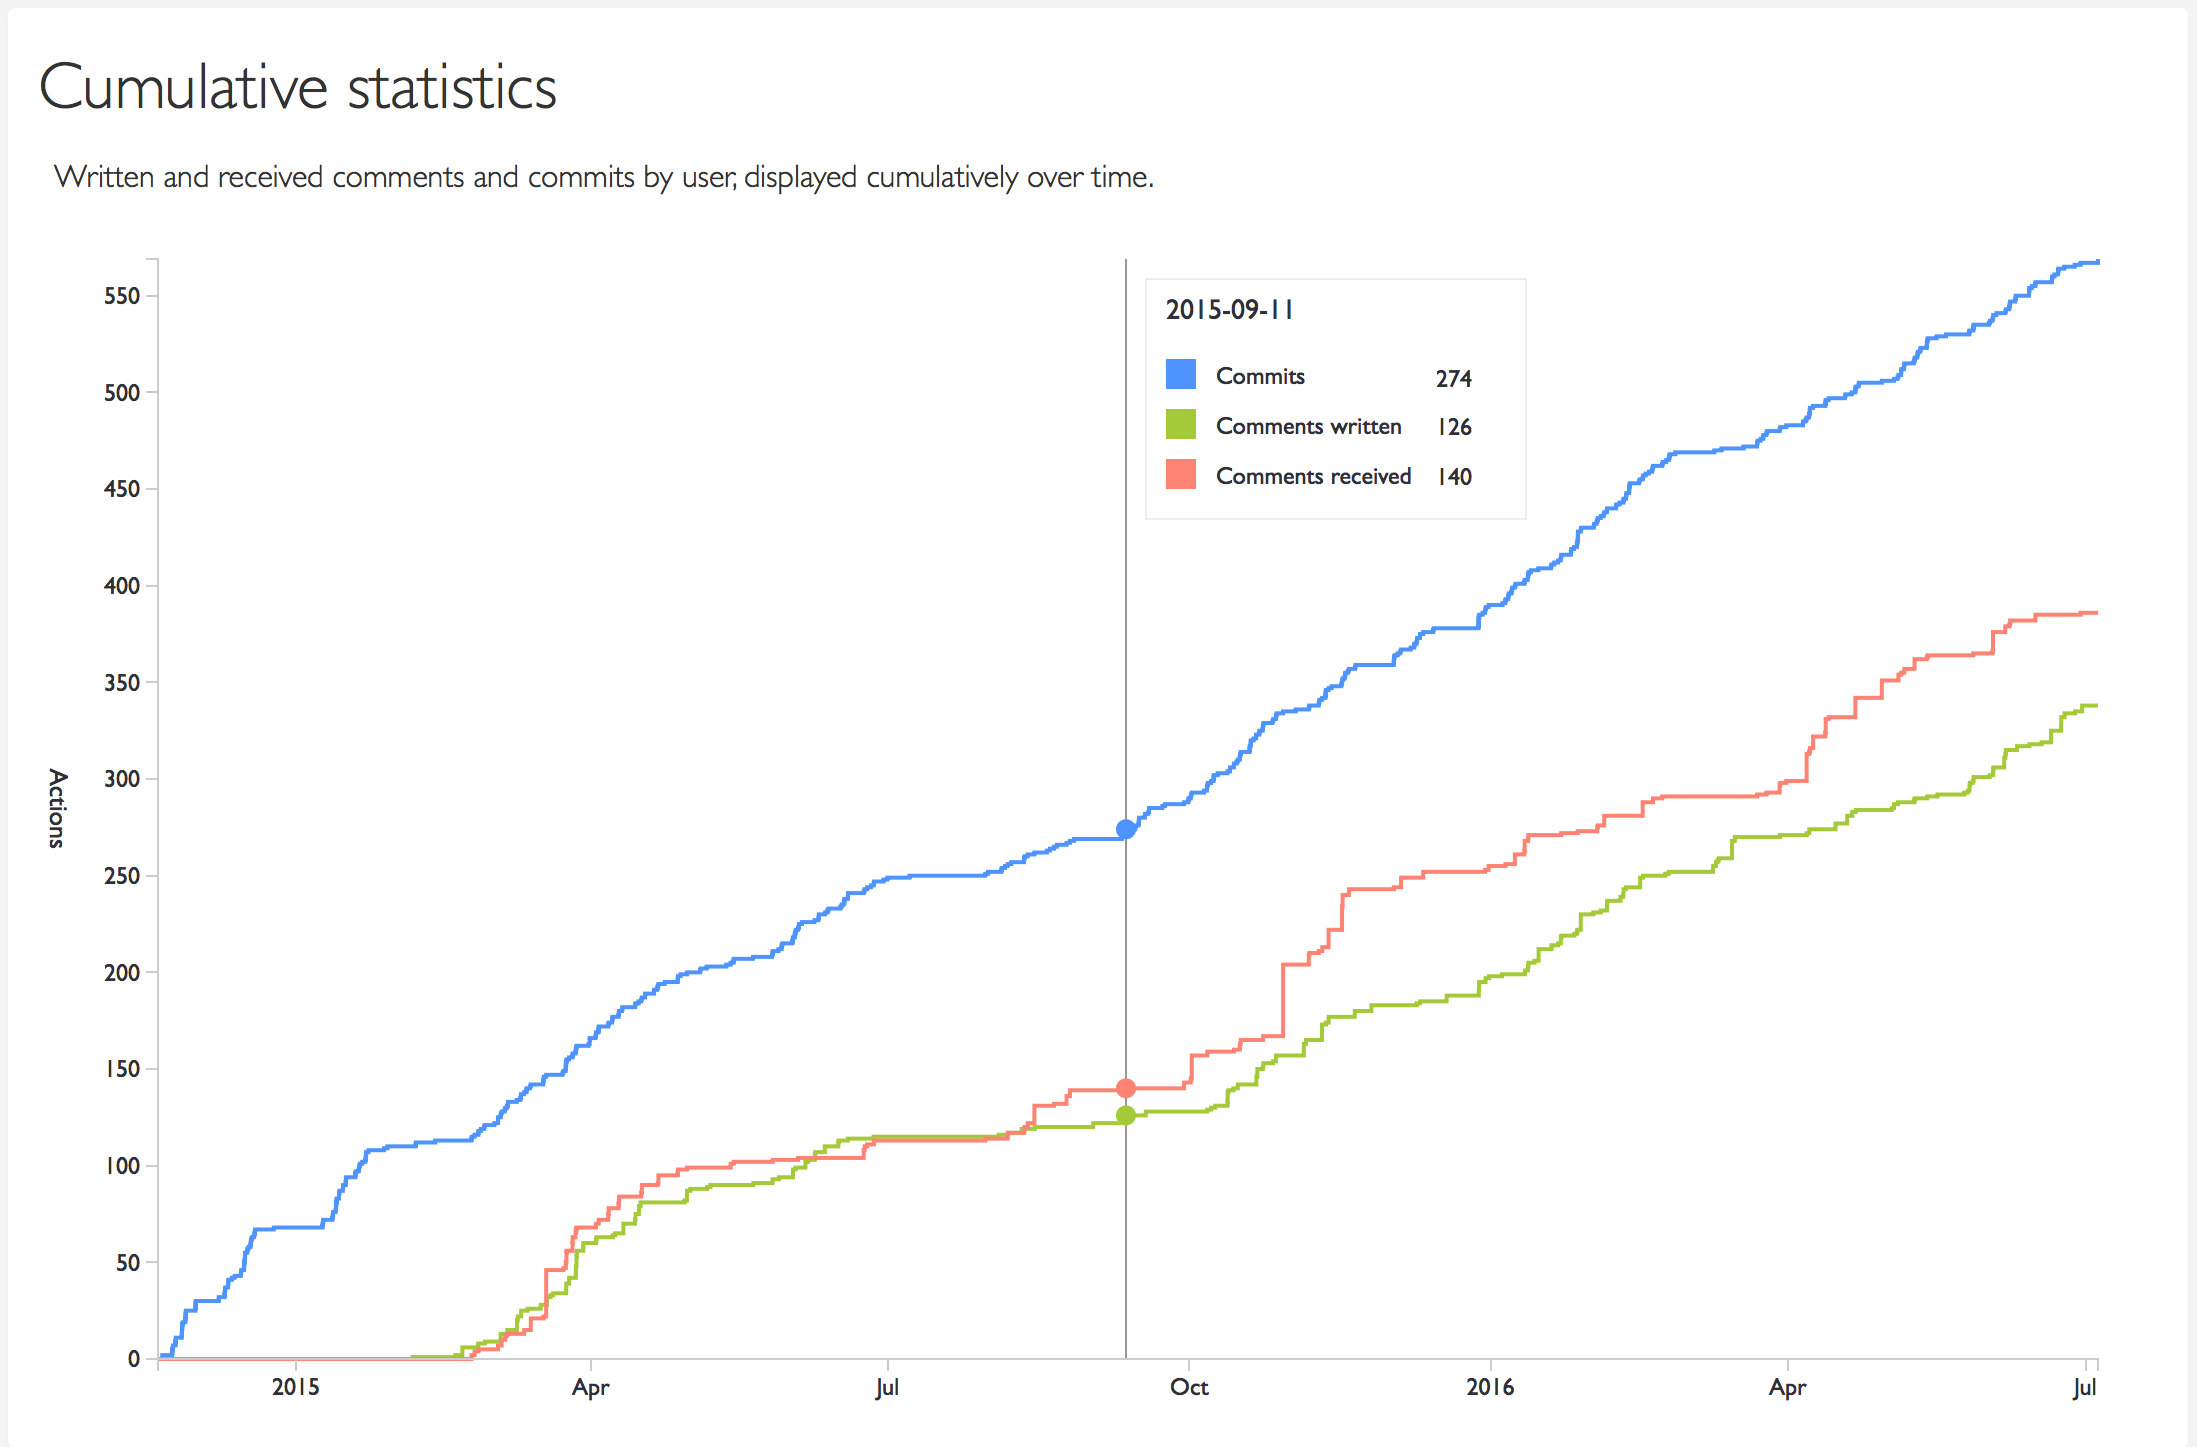 Cumulative statistics chart of commits, and comments written/received